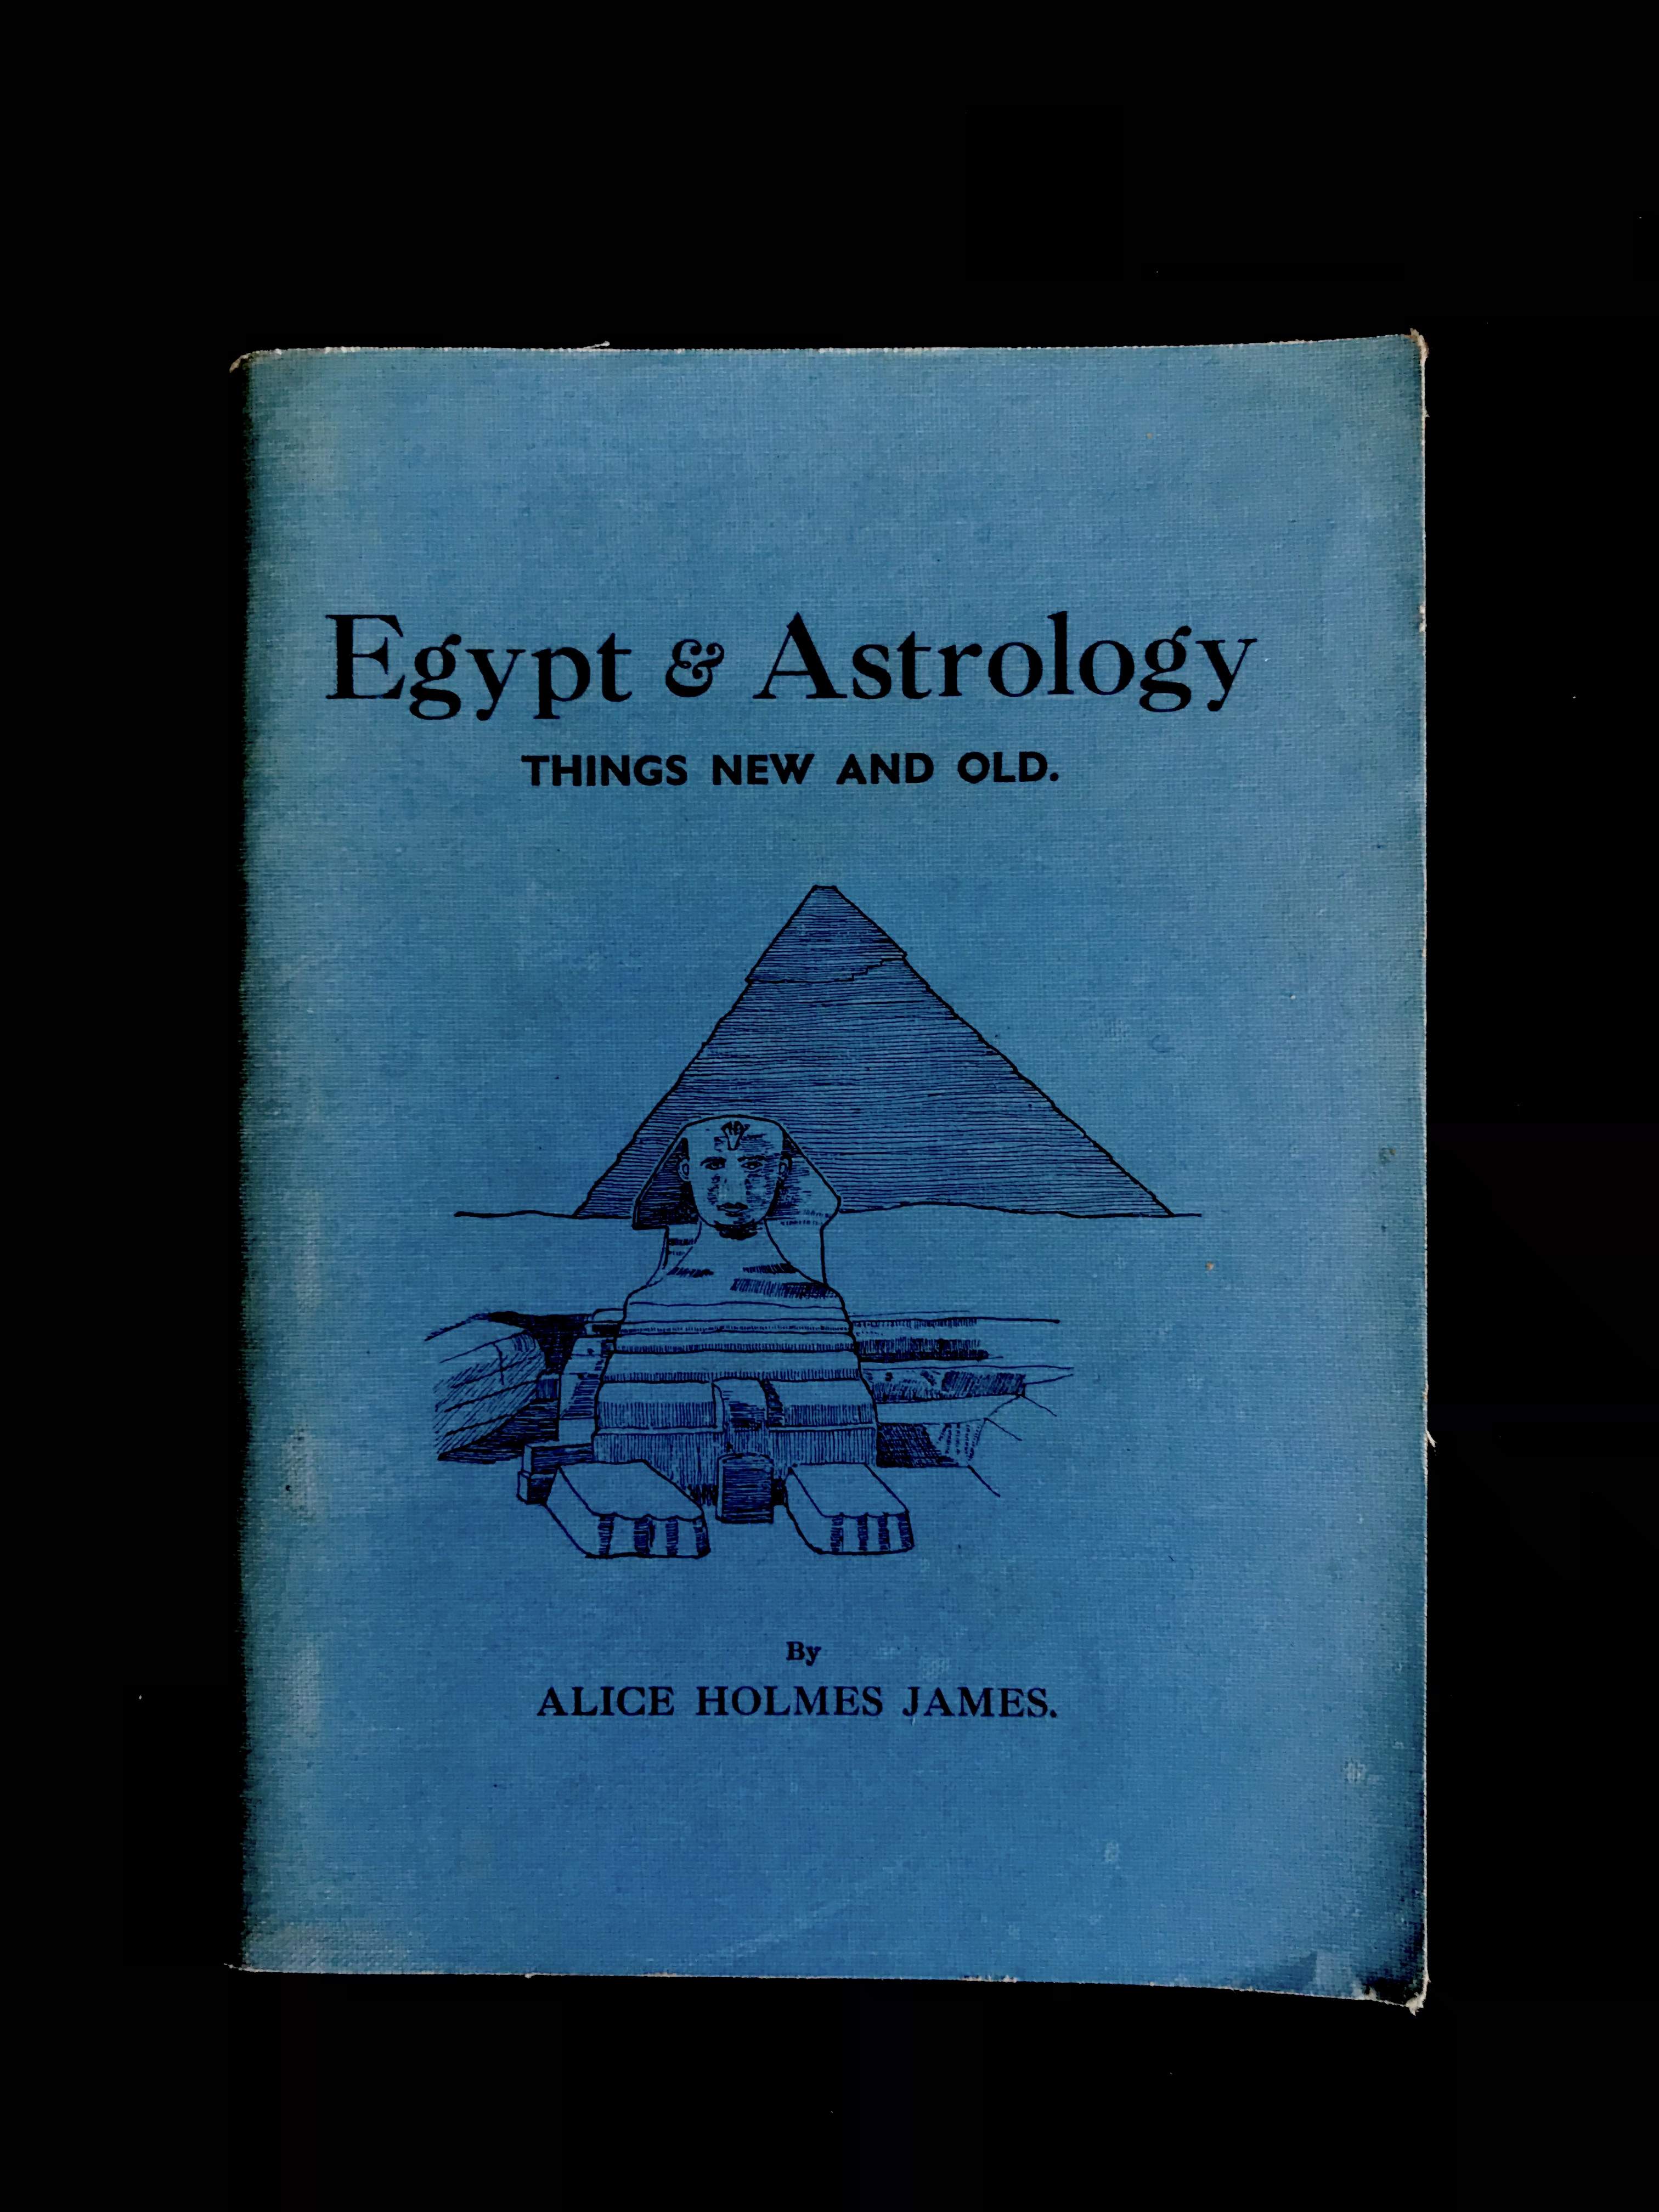 Egypt & Astrology by Alice Holmes James